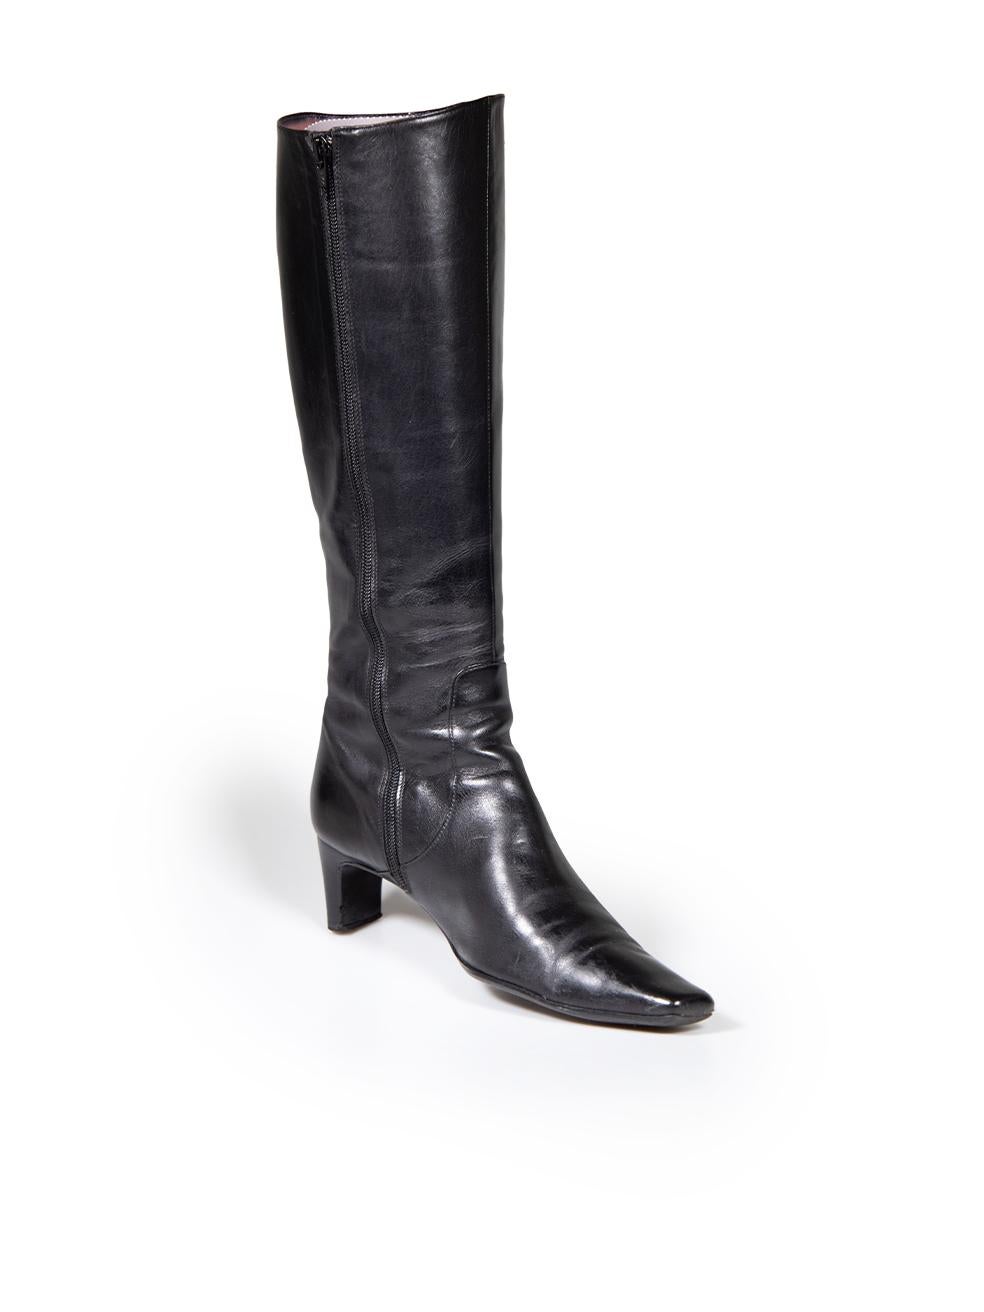 CONDITION is Very good. Minimal wear to boots is evident. General wear to soles, with an indent to the left shoe heel on this used Mascaró designer resale item.
 
 
 
 Details
 
 
 Black
 
 Leather
 
 Boots
 
 Knee high
 
 Kitten heel
 
 Point toe
